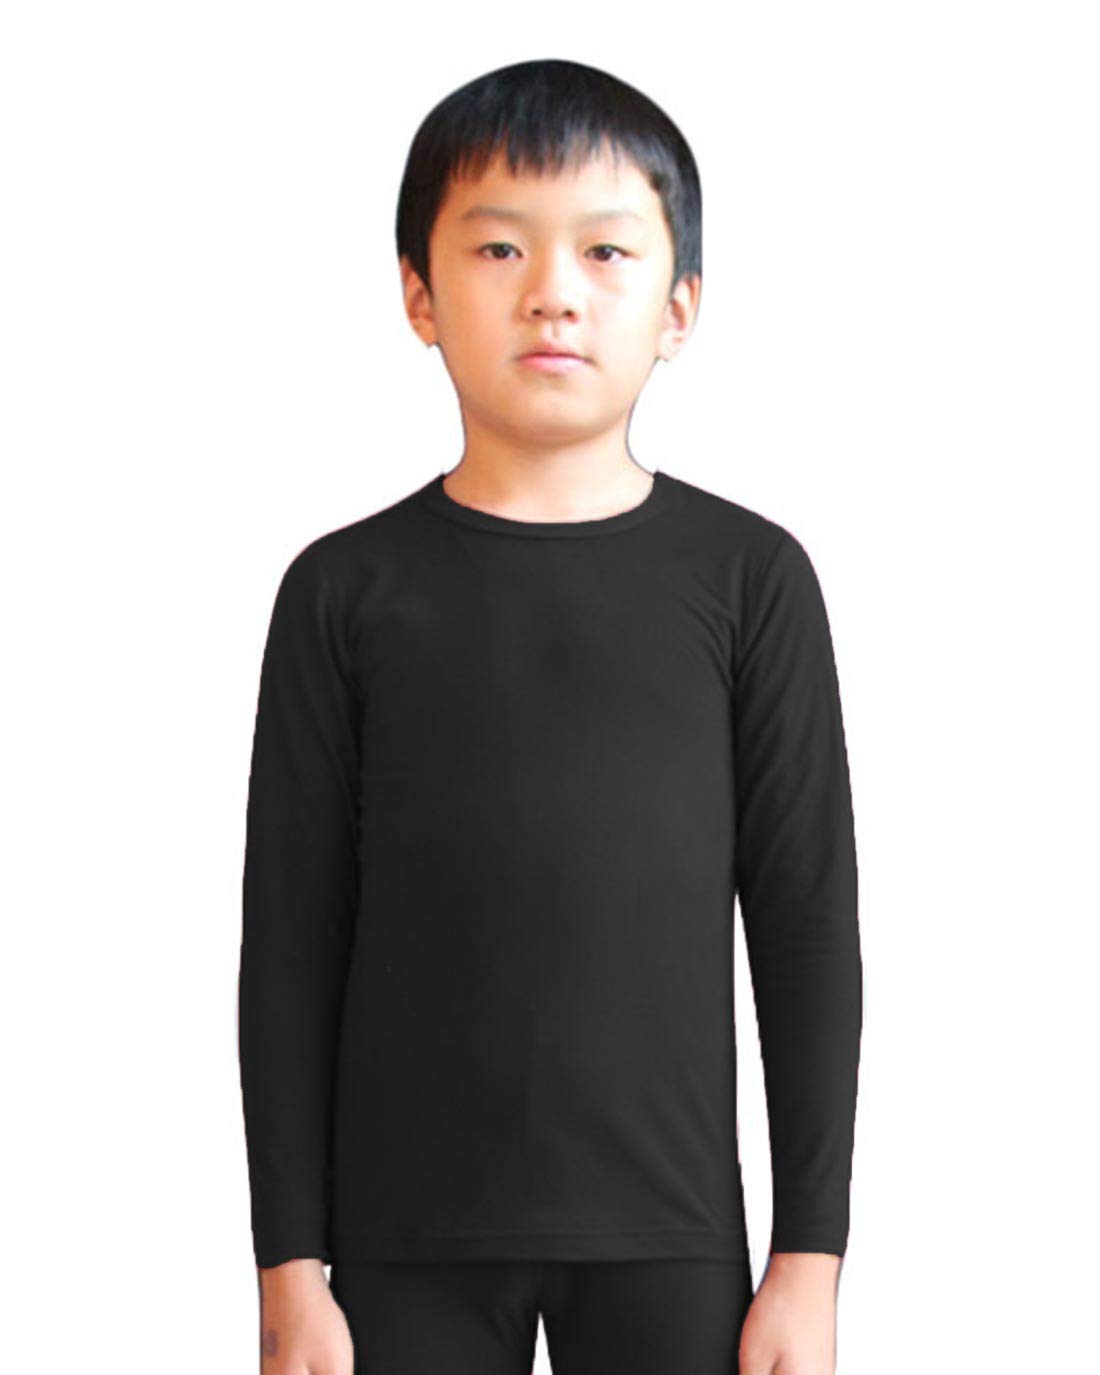 Under Armour Boys Shirt Youth Extra Large Gray Black Thermal Long Sleeves  Kids